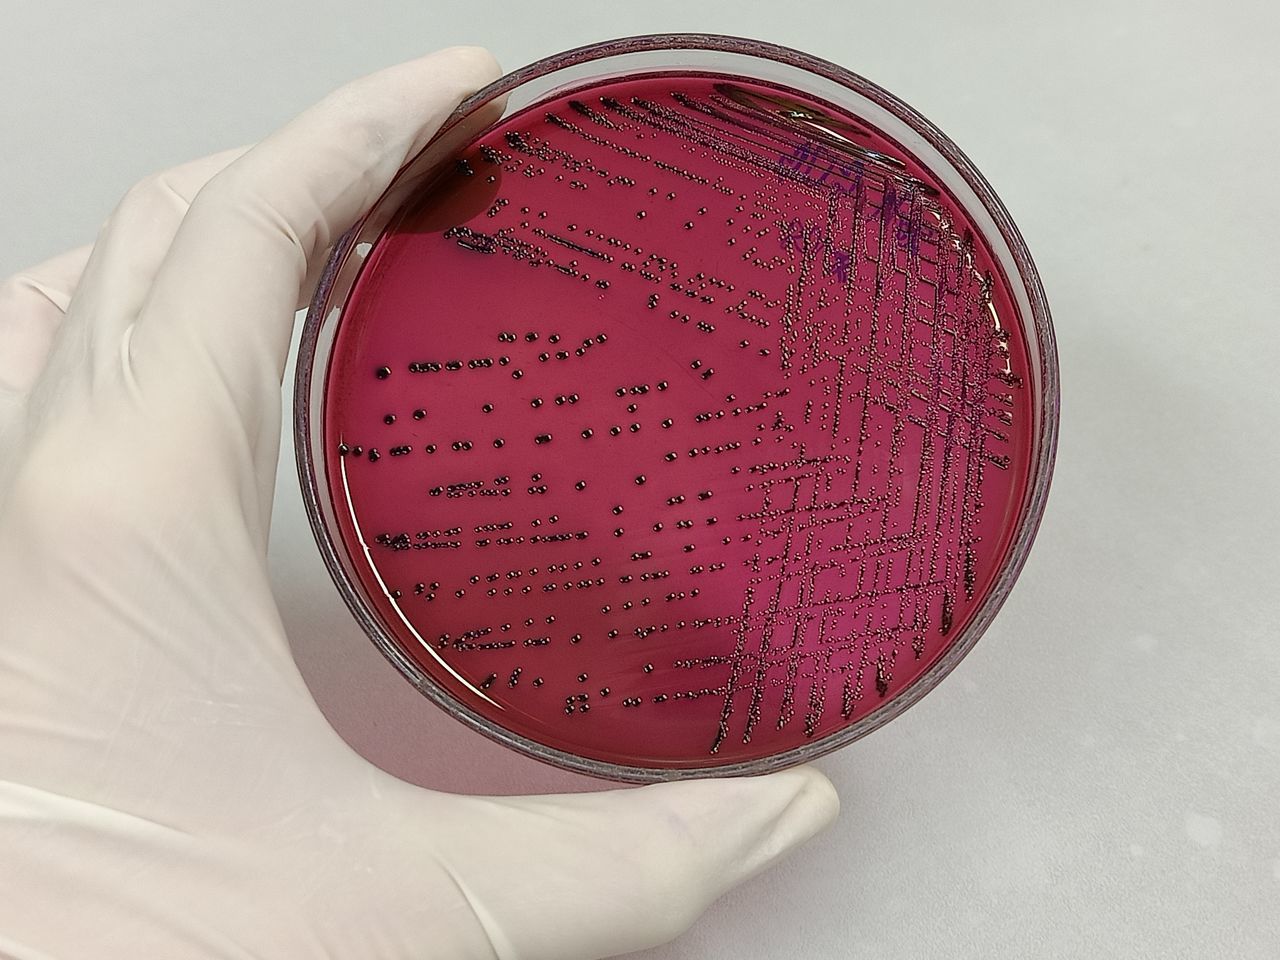 pink, red, science, research, scientific experiment, biology, laboratory, lip, indoors, education, medical research, biochemistry, healthcare and medicine, petri dish, microbiology, hand, one person, holding, human eye, close-up, biotechnology, protection, studio shot, circle